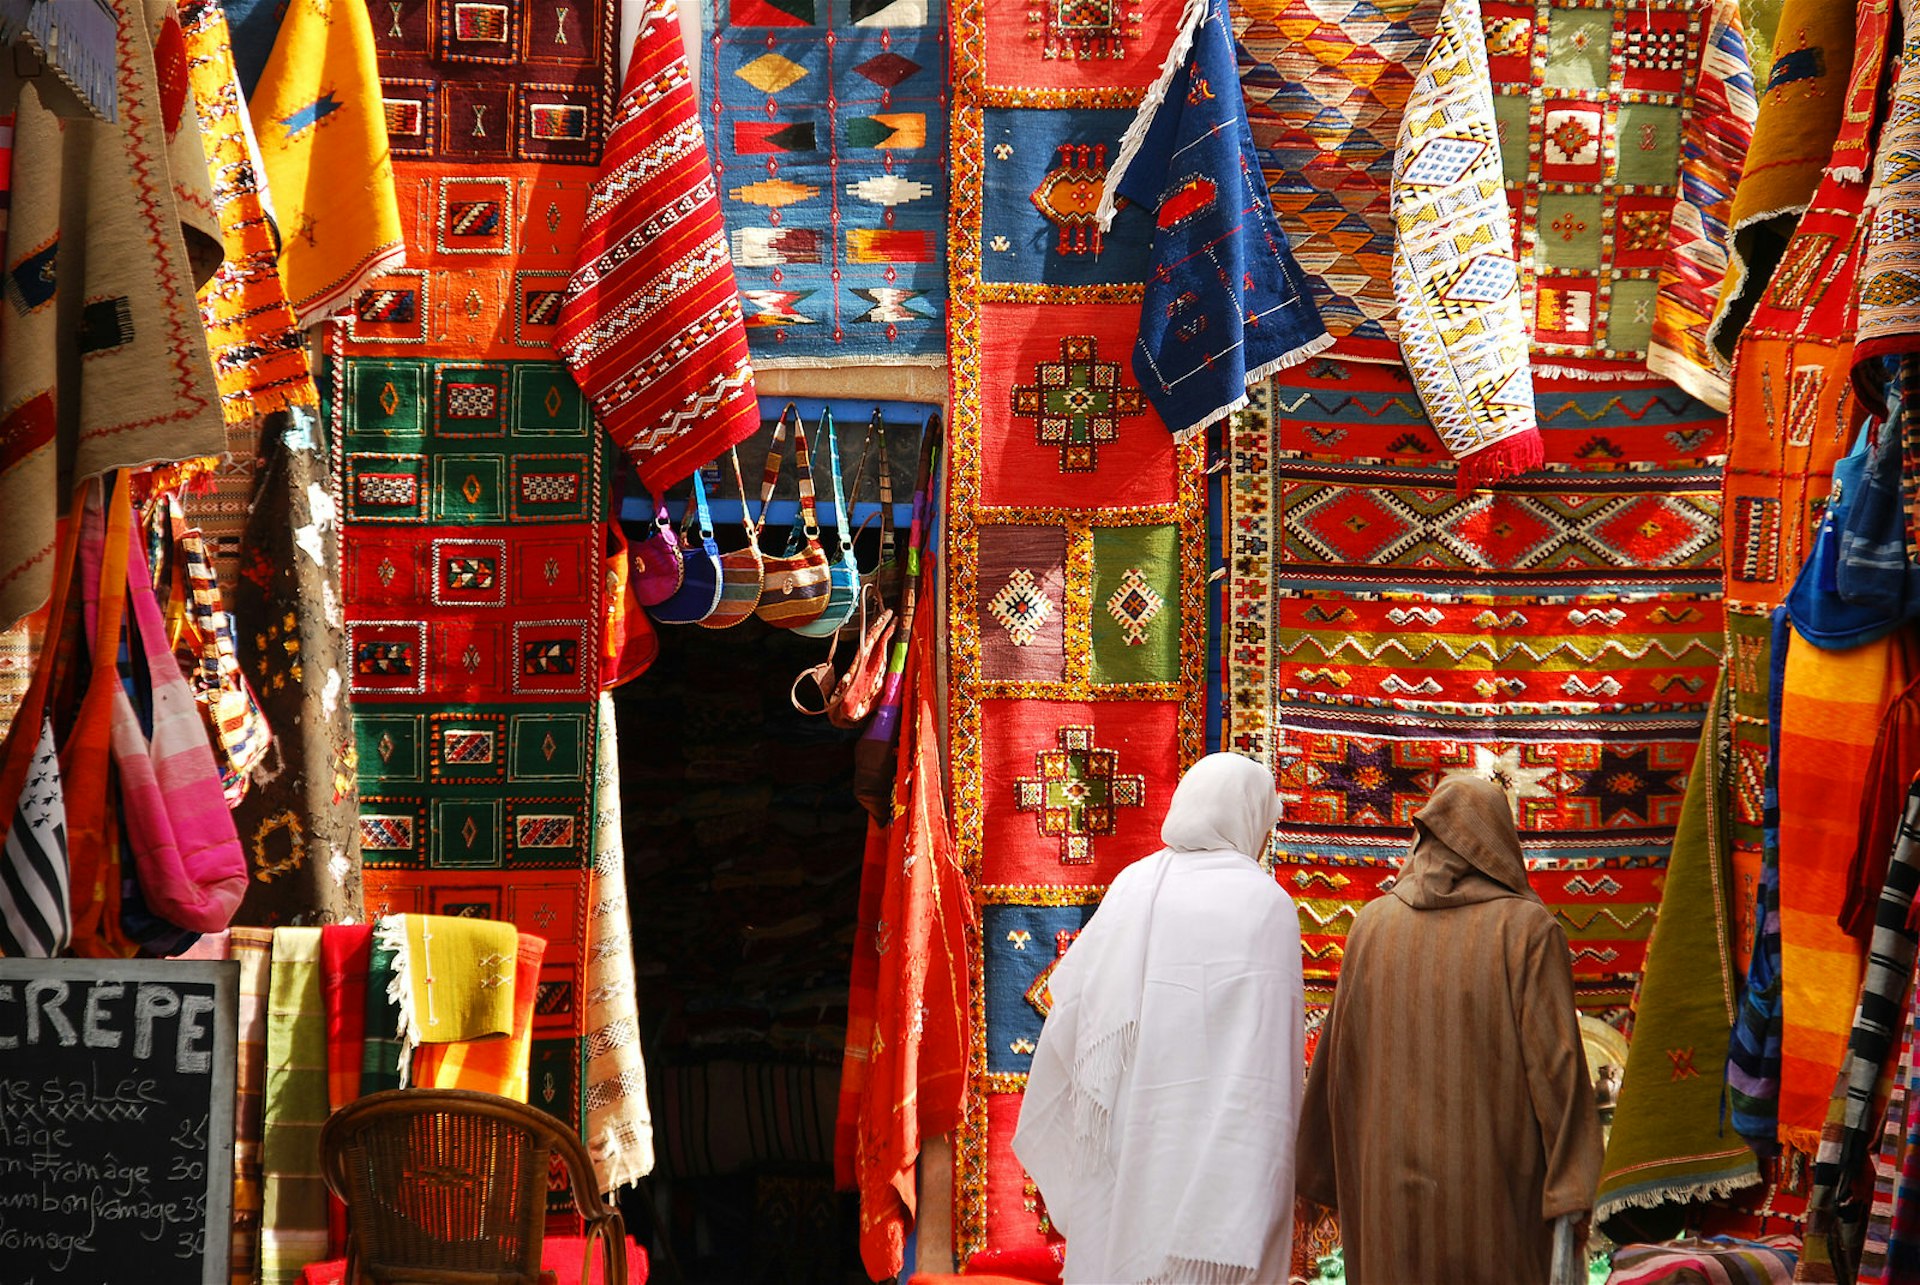 Women wandering through the Carpet Market in Essaouira, Morocco. Image by leuntje / Getty Images